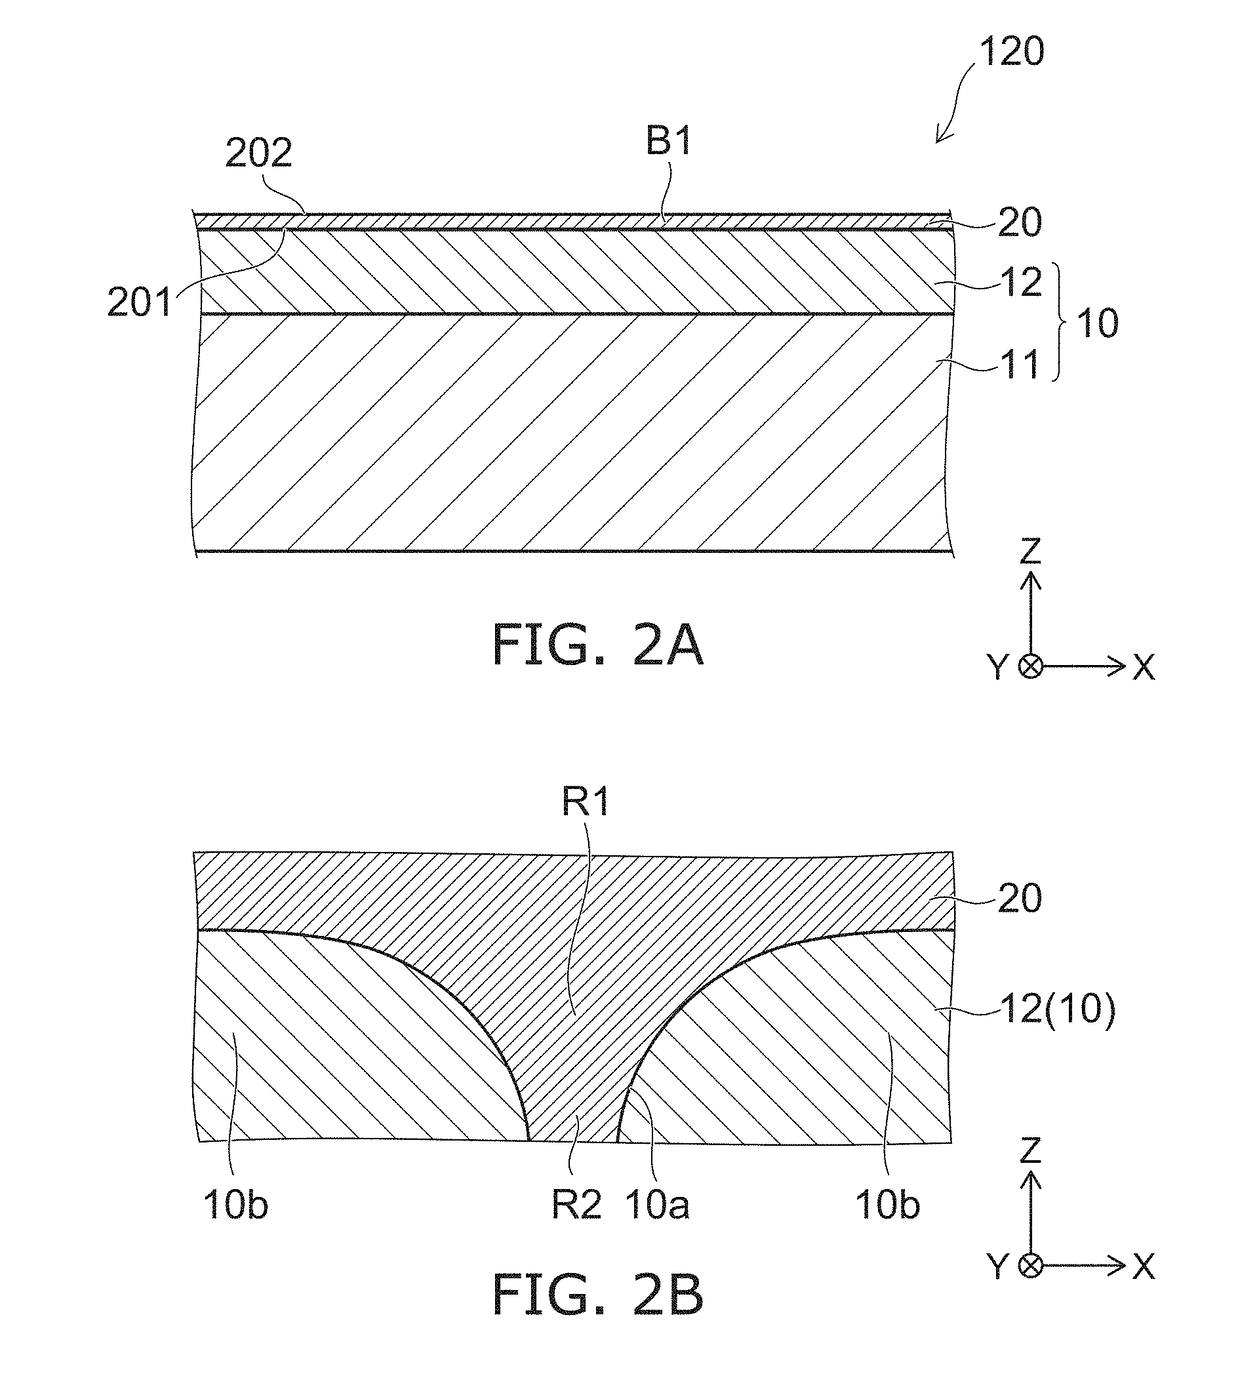 Member for semiconductor manufacturing device